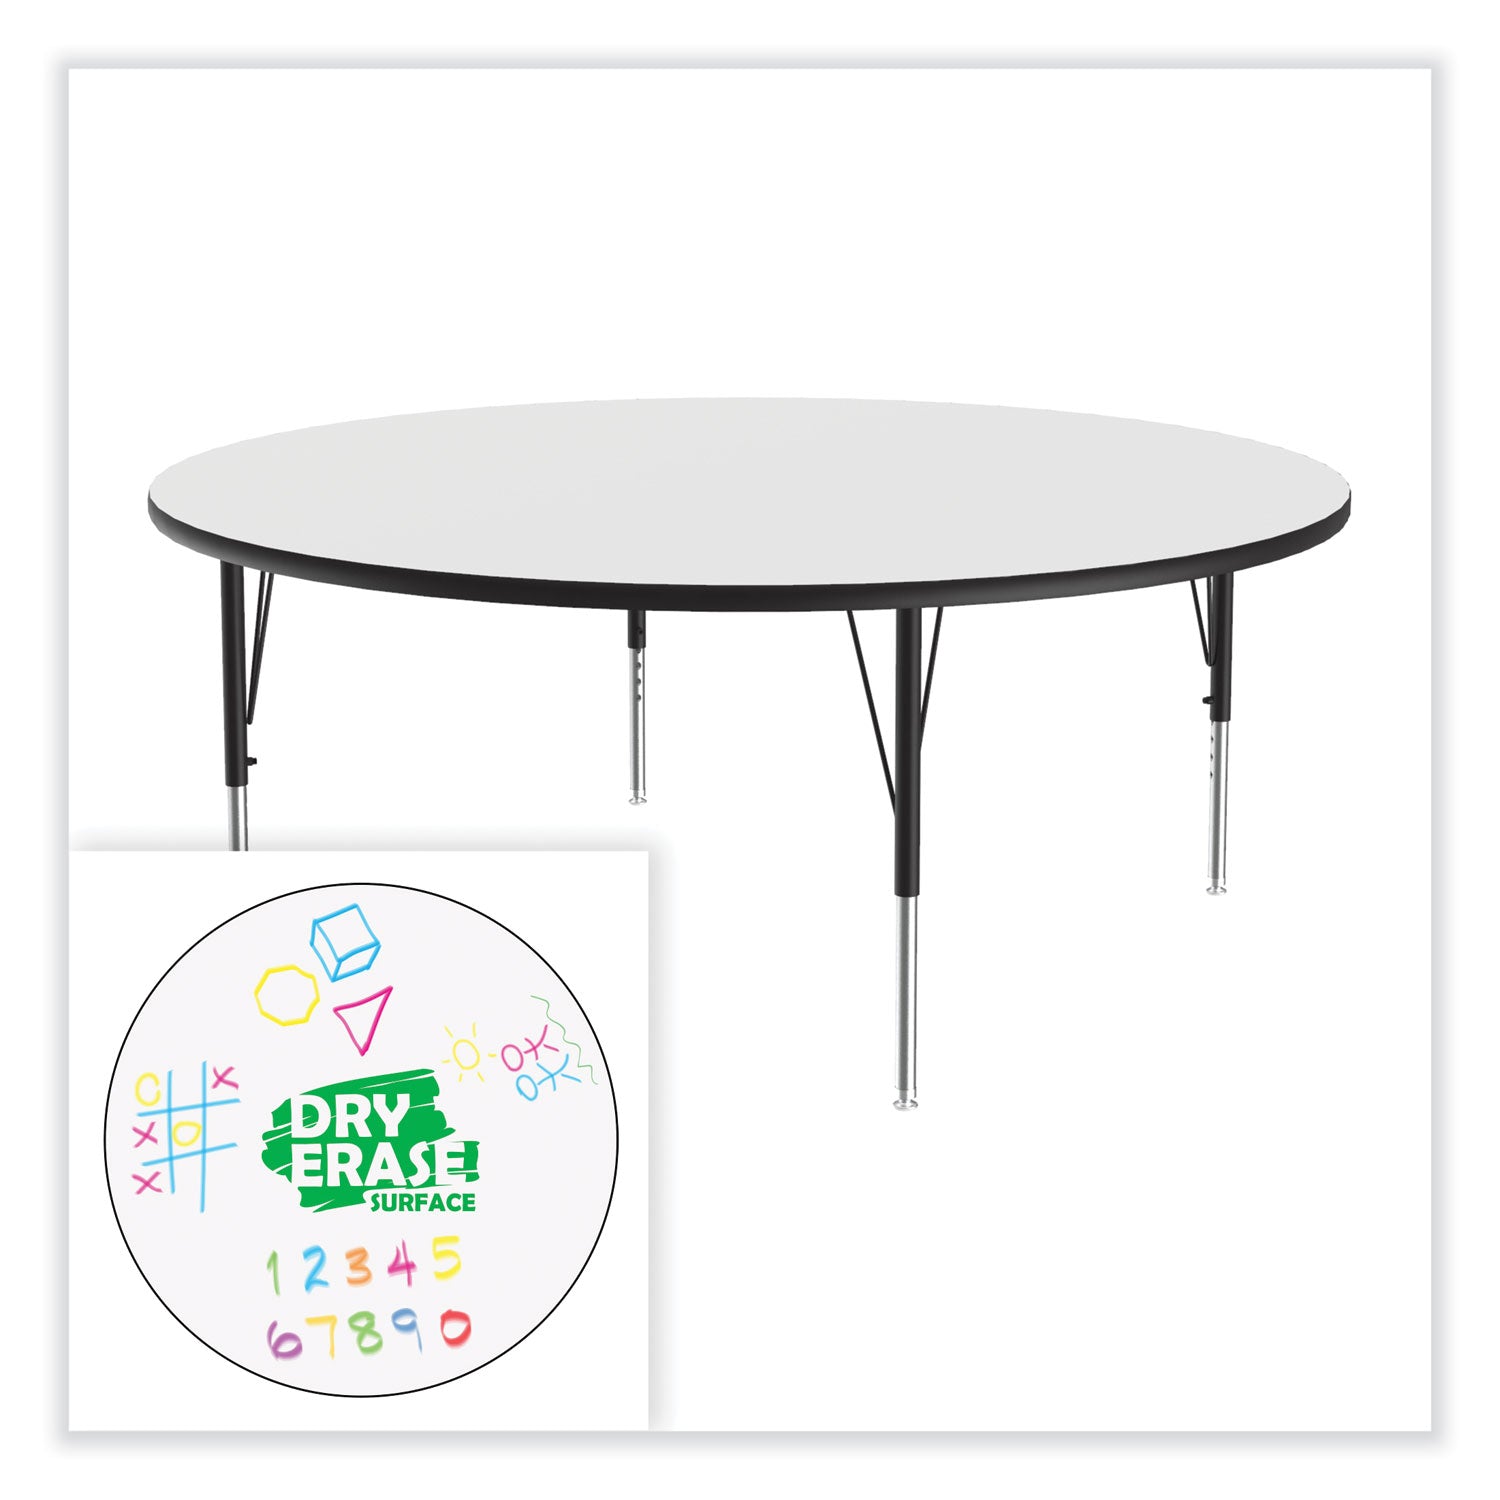 markerboard-activity-tables-round-60-x-19-to-29-white-top-black-silver-legs-4-pallet-ships-in-4-6-business-days_crl60derd80954p - 8